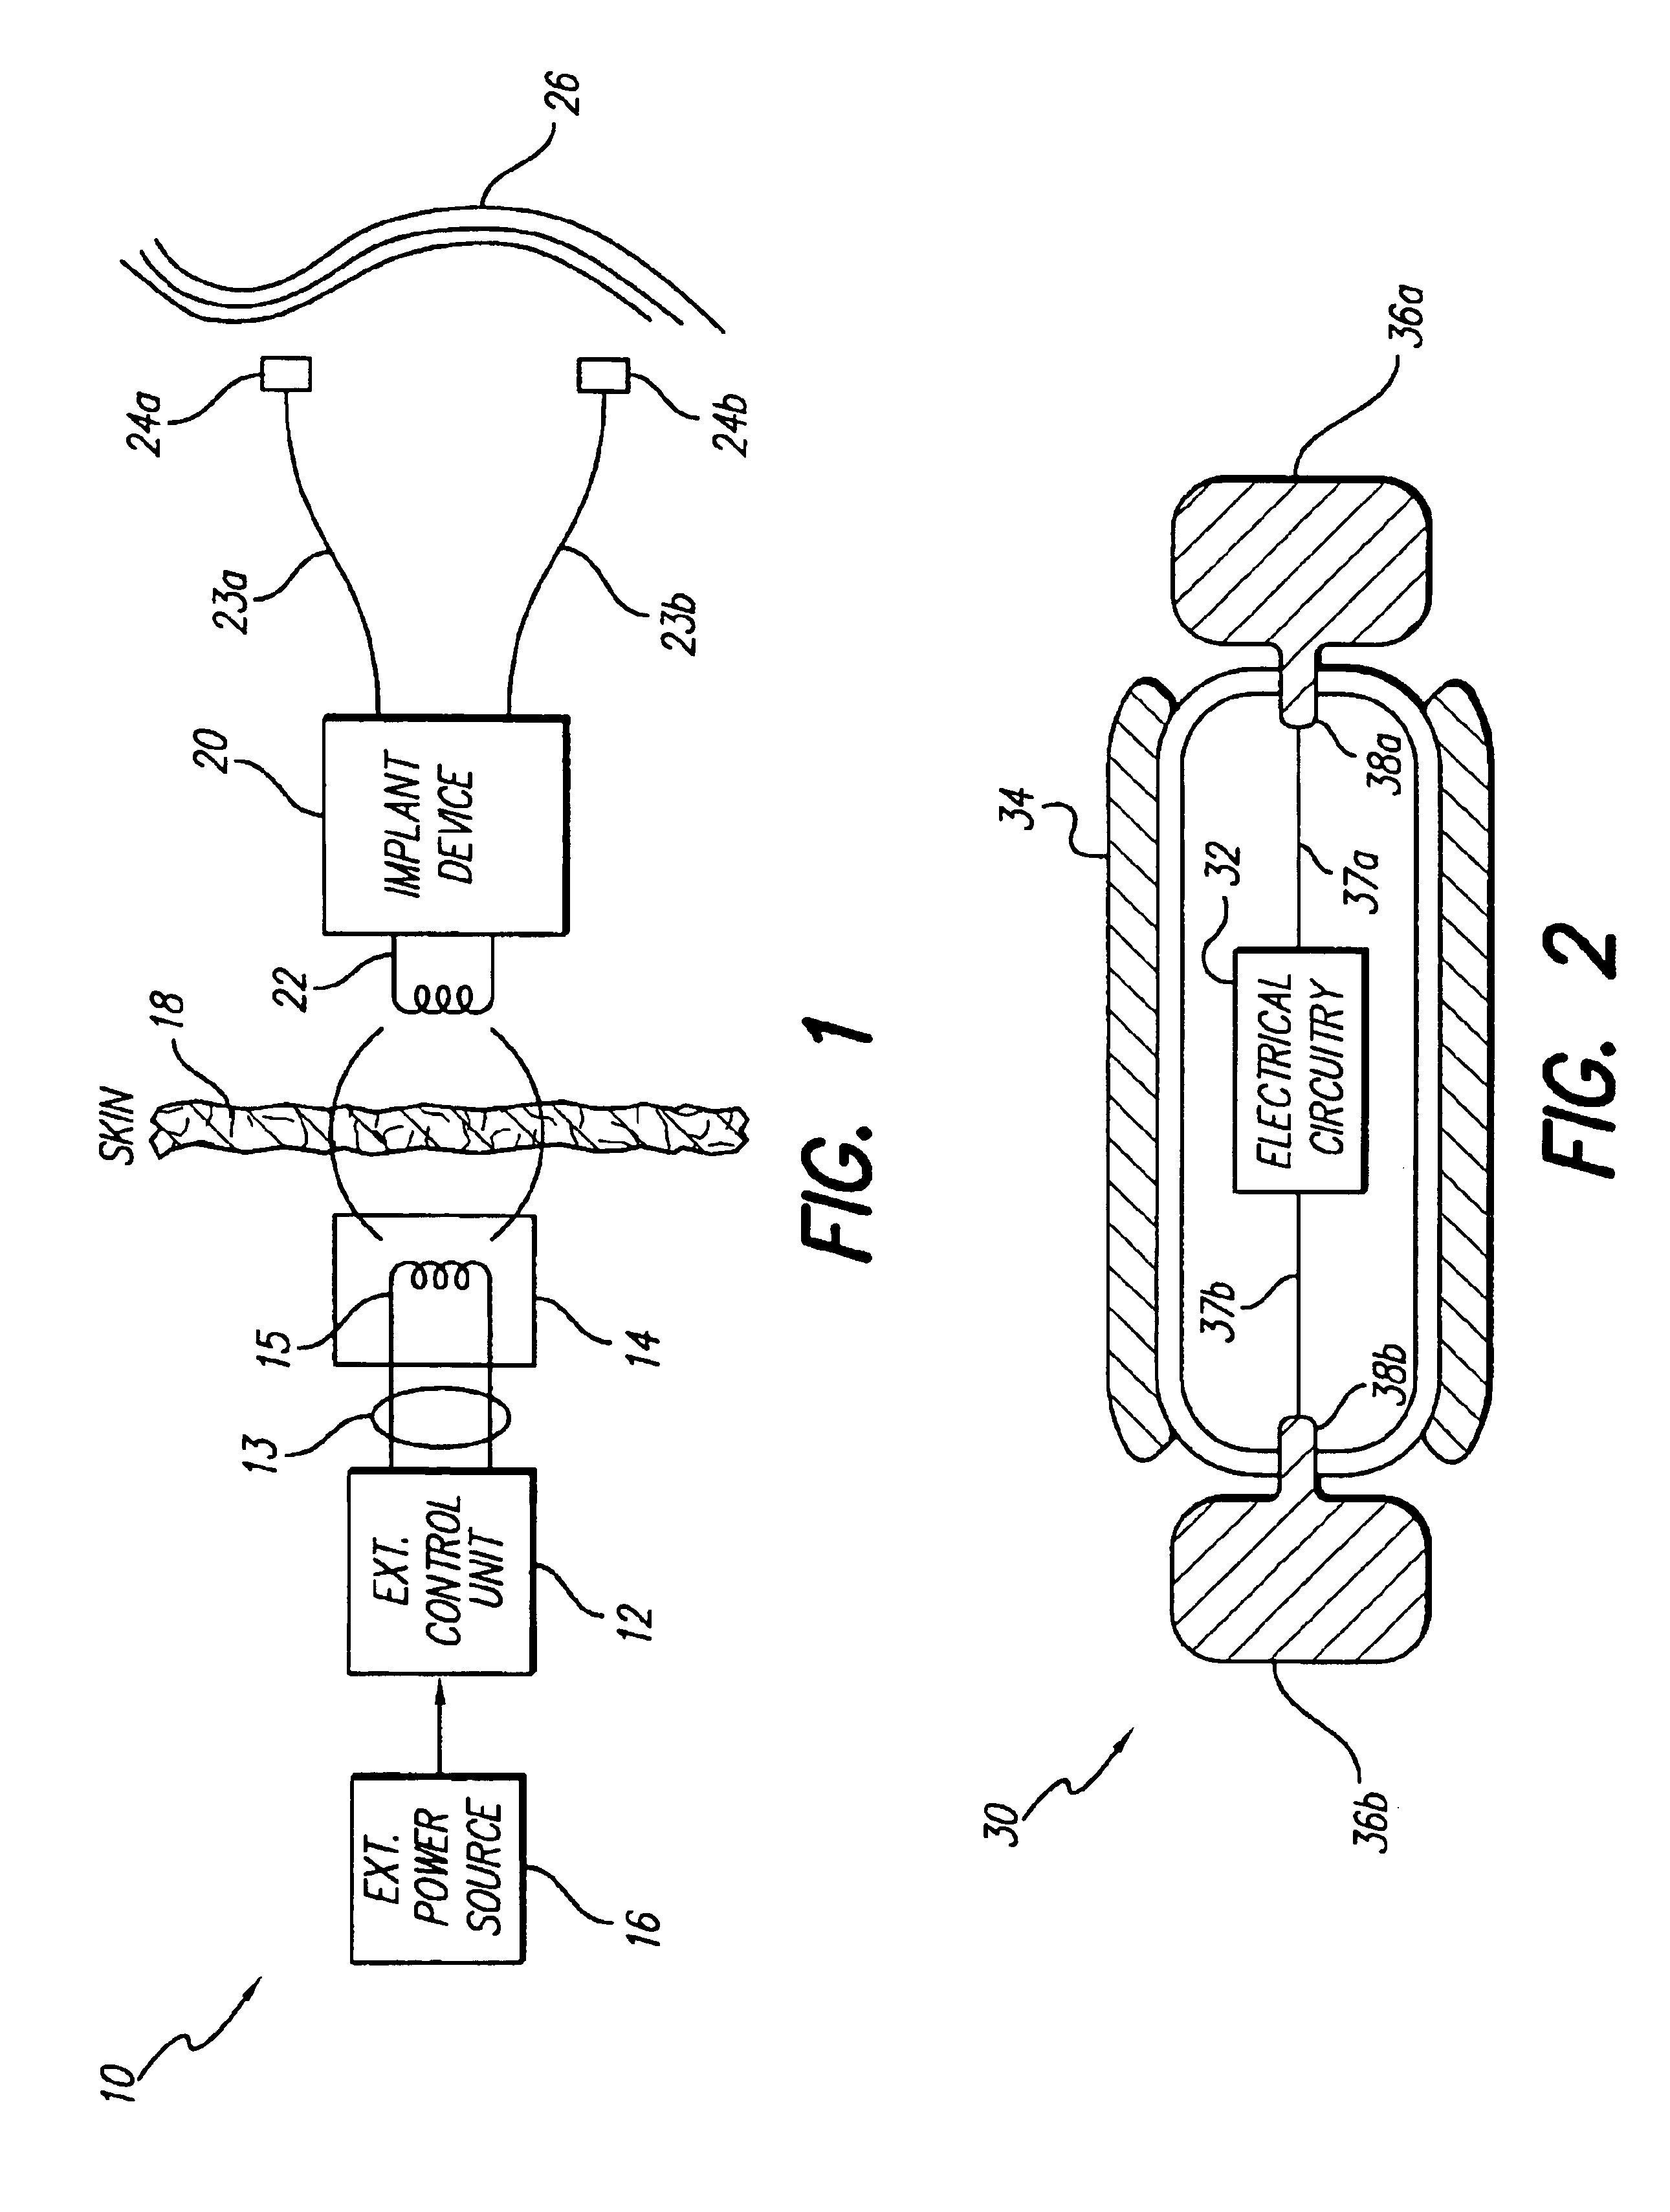 Voltage converter for implantable microstimulator using RF-powering coil